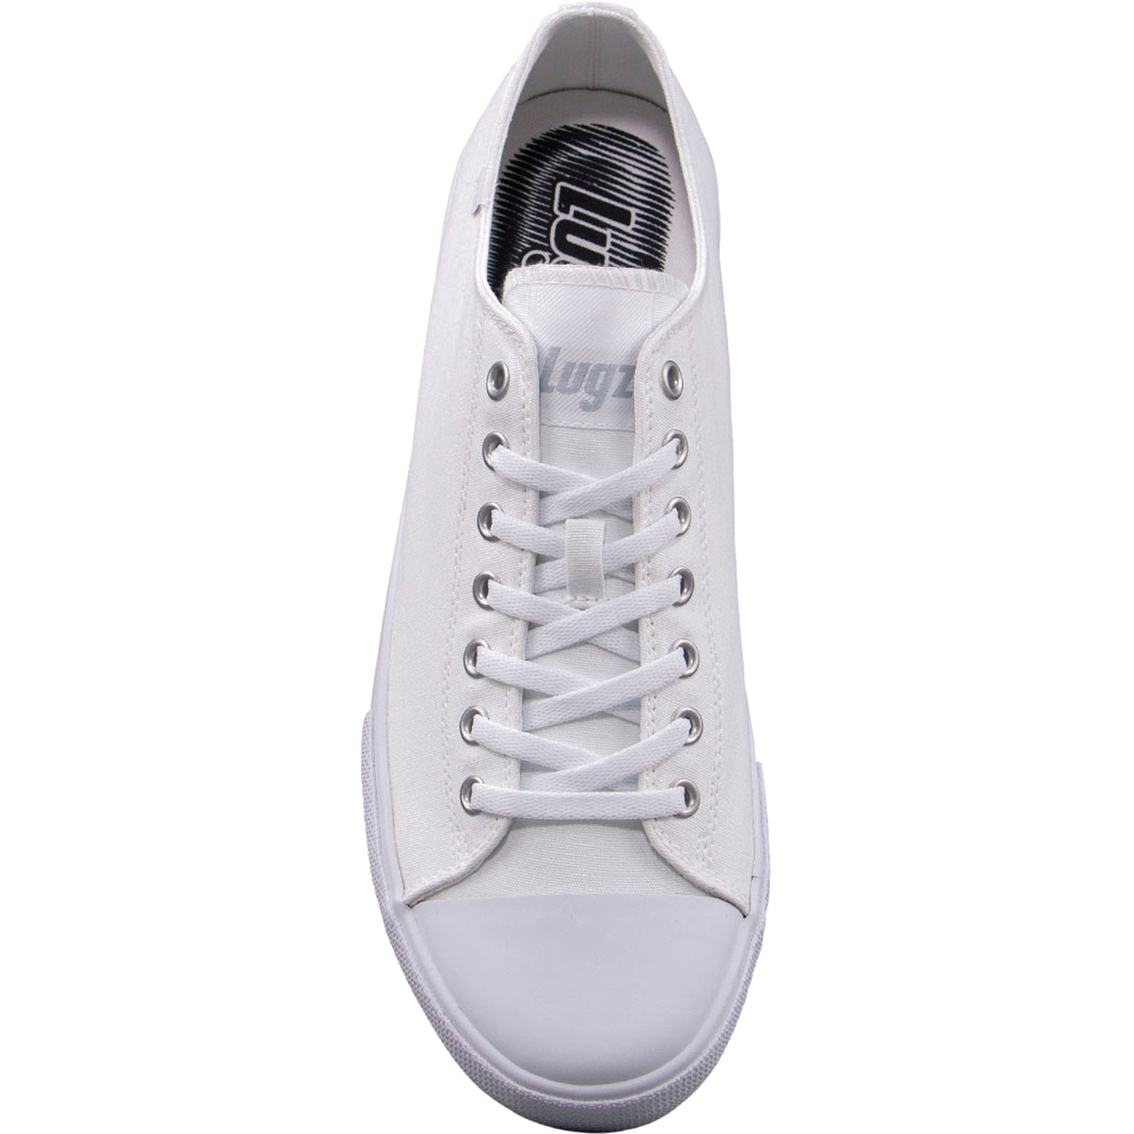 Lugz Men's Stagger Lo Sneakers - Image 5 of 6